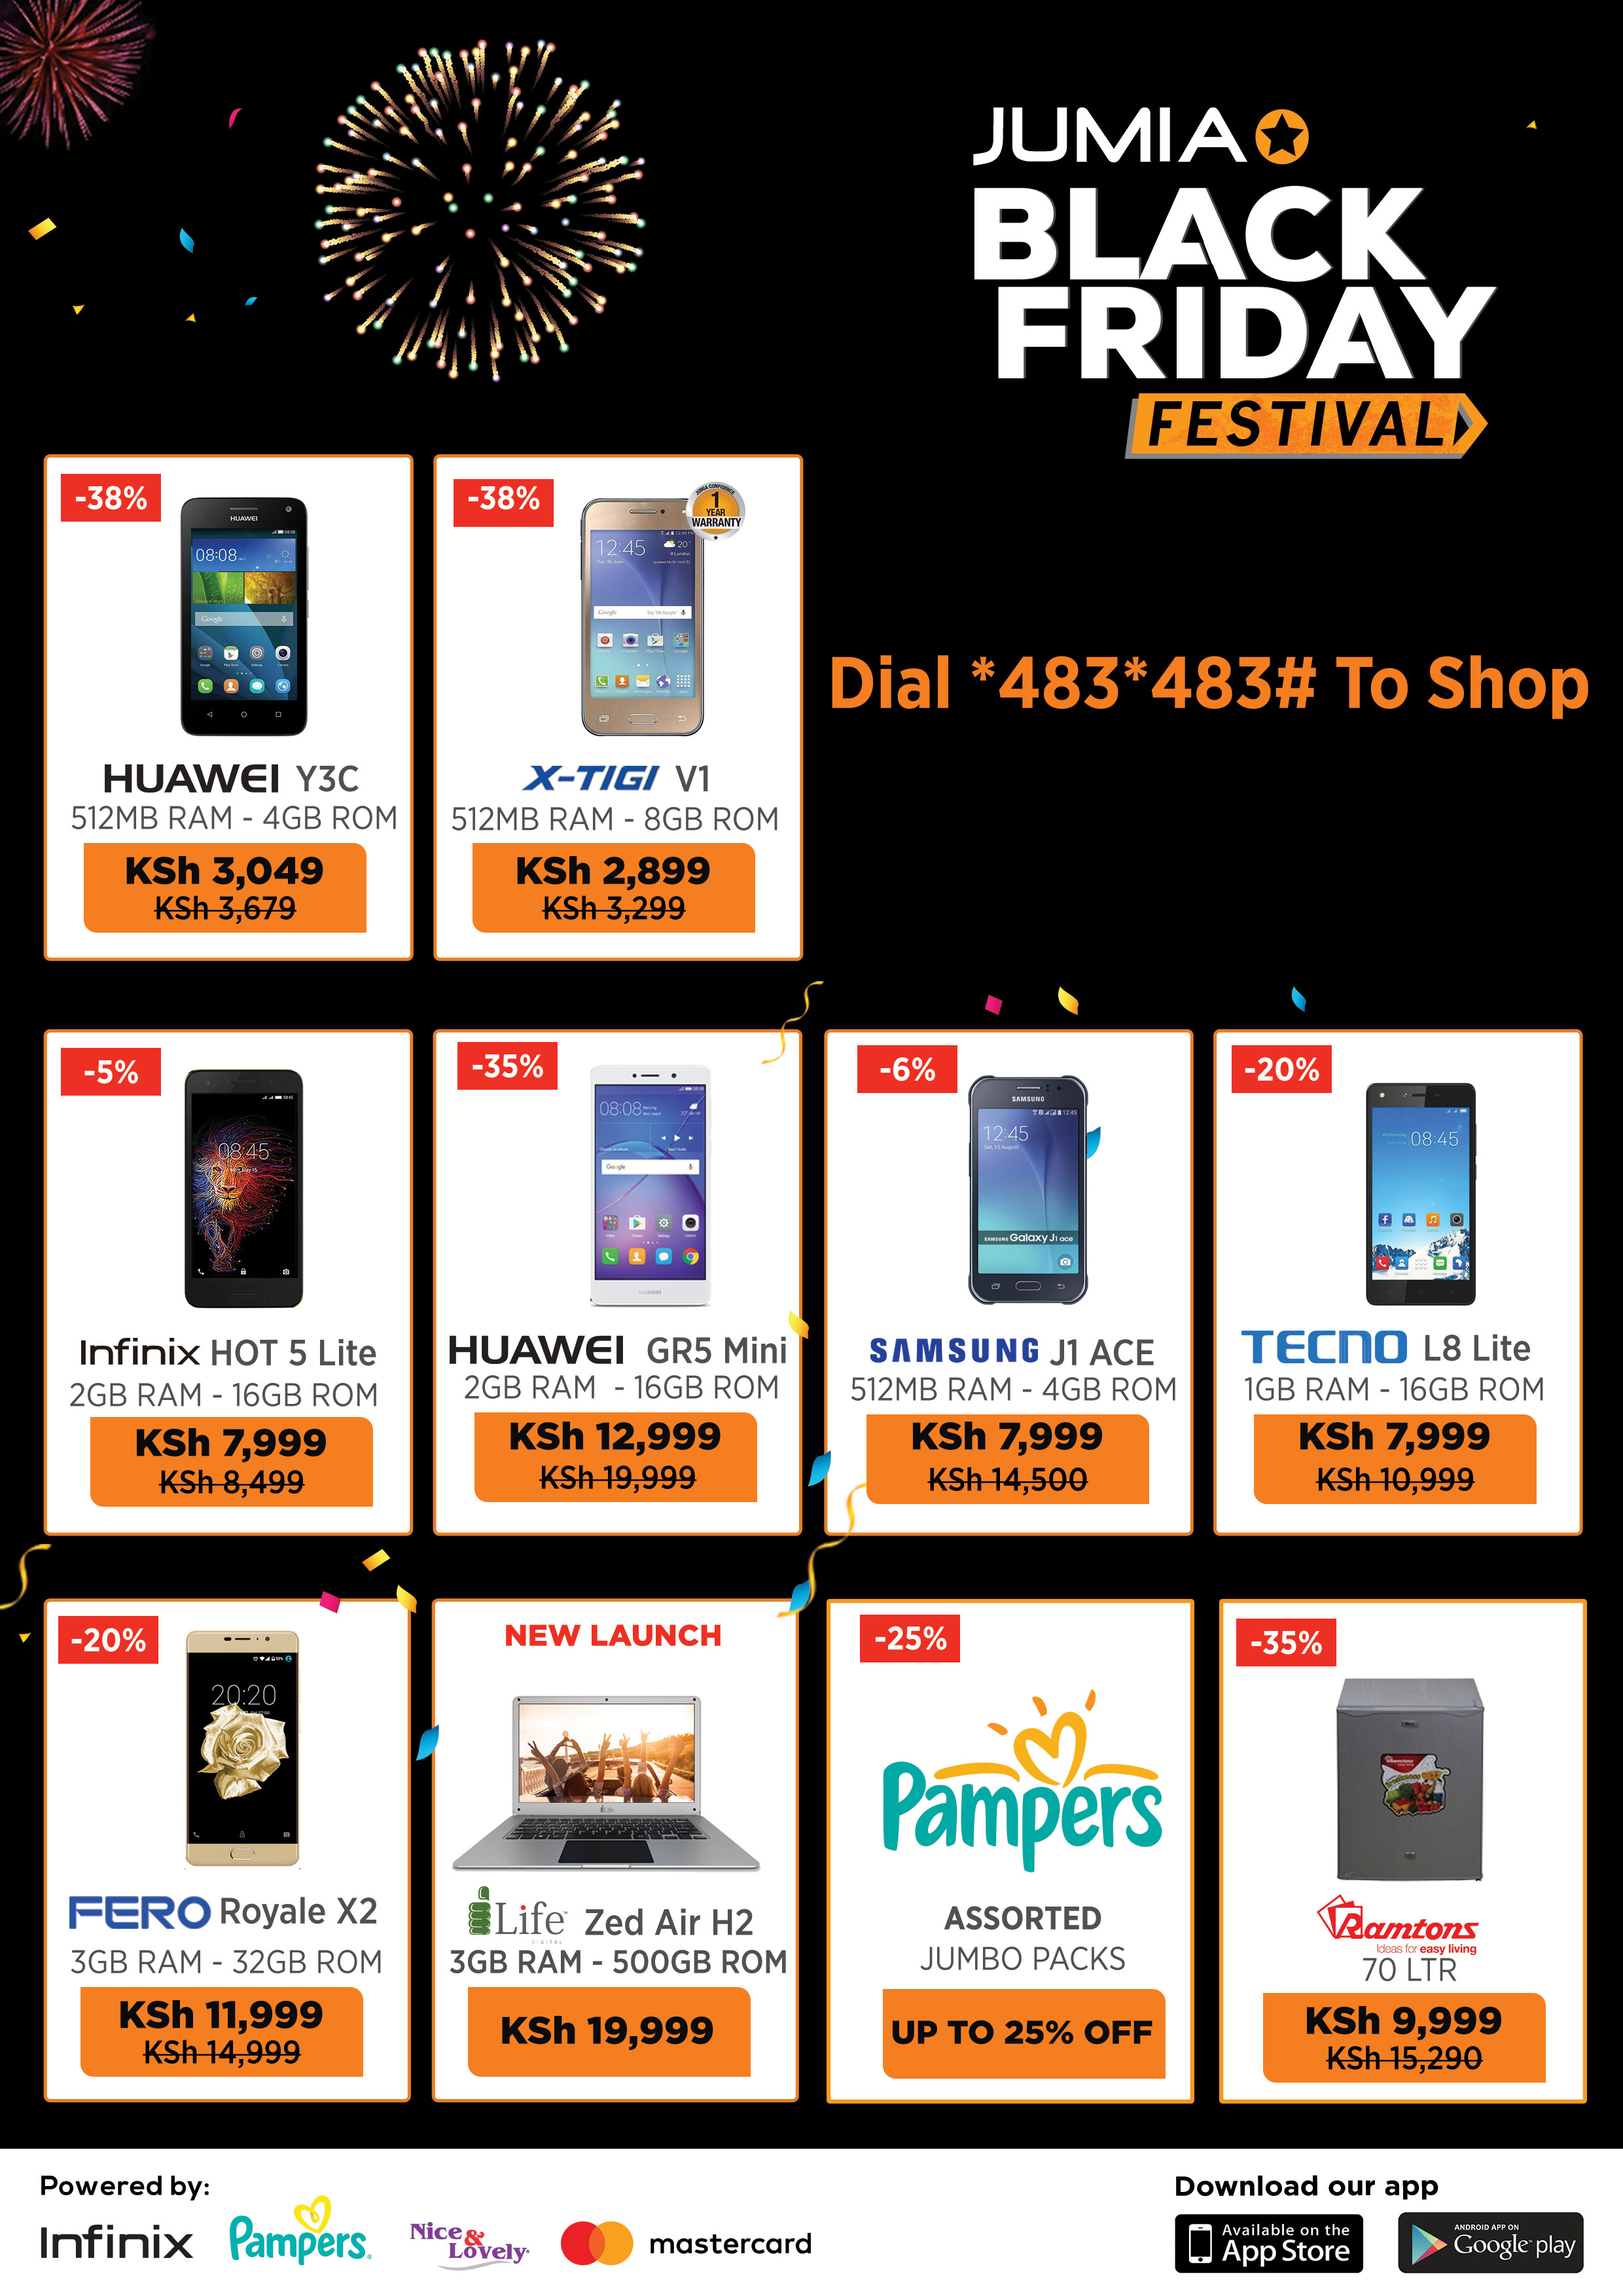 You can now place your Jumia Black Friday orders via USSD - How Do Black Friday Mobile Deals Work